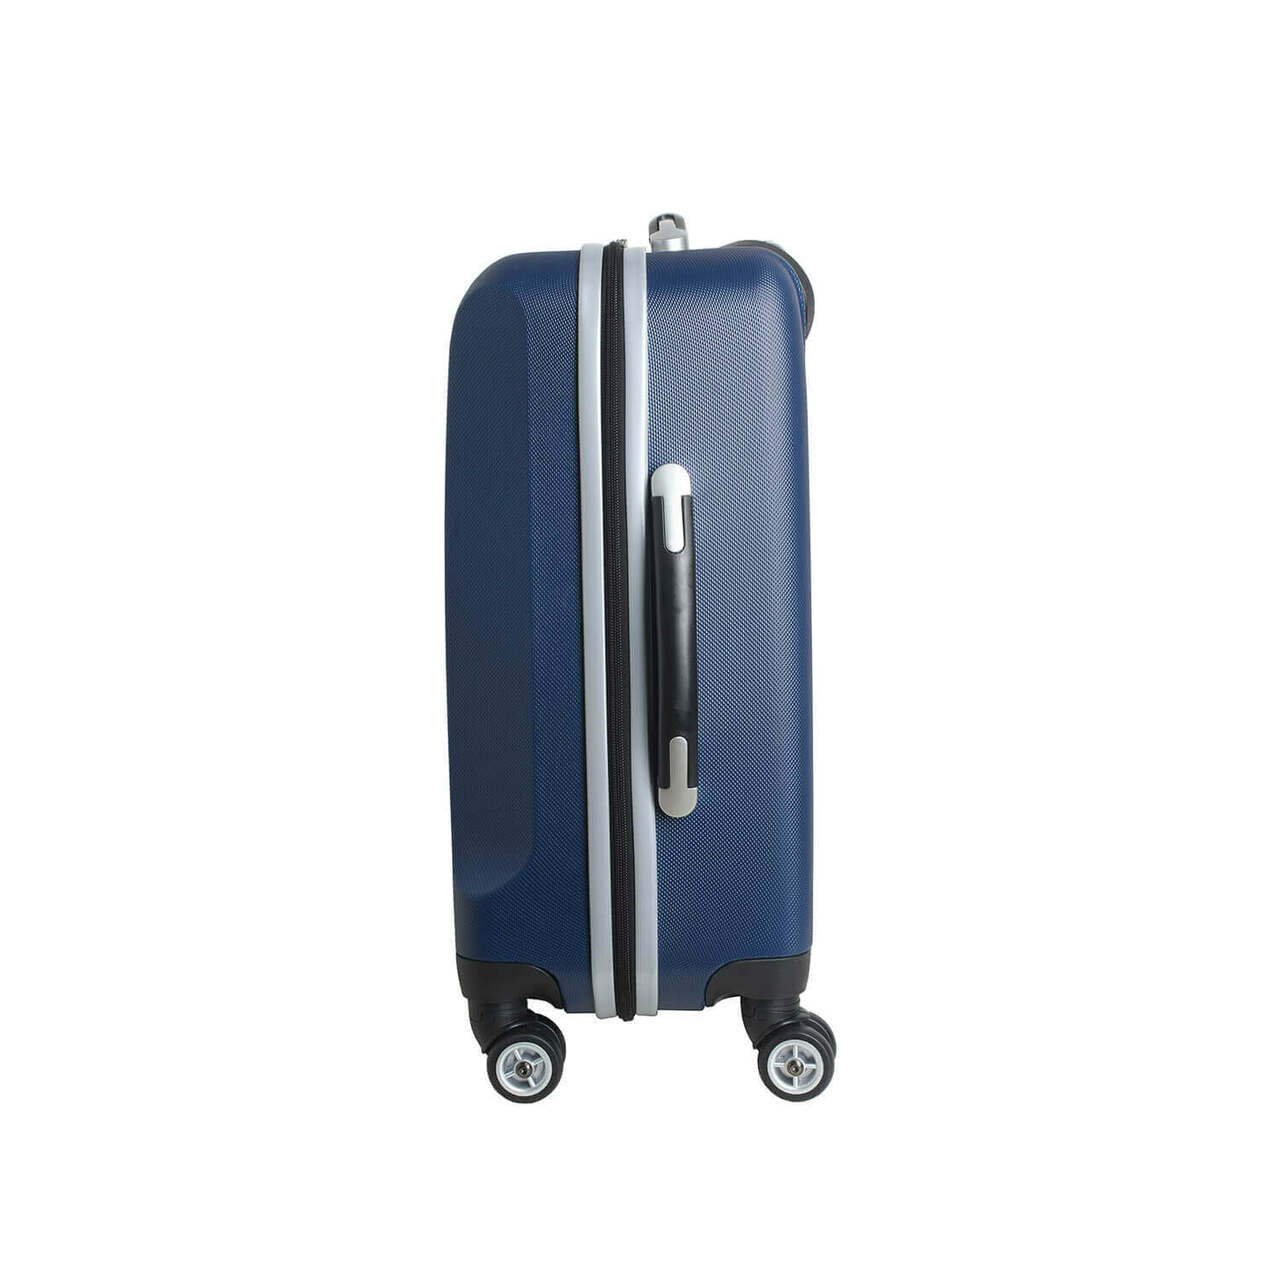 Personalized Initial Name letter "F" 20 inches Carry on Hardcase Spinner Luggage by Mojo in NAVY